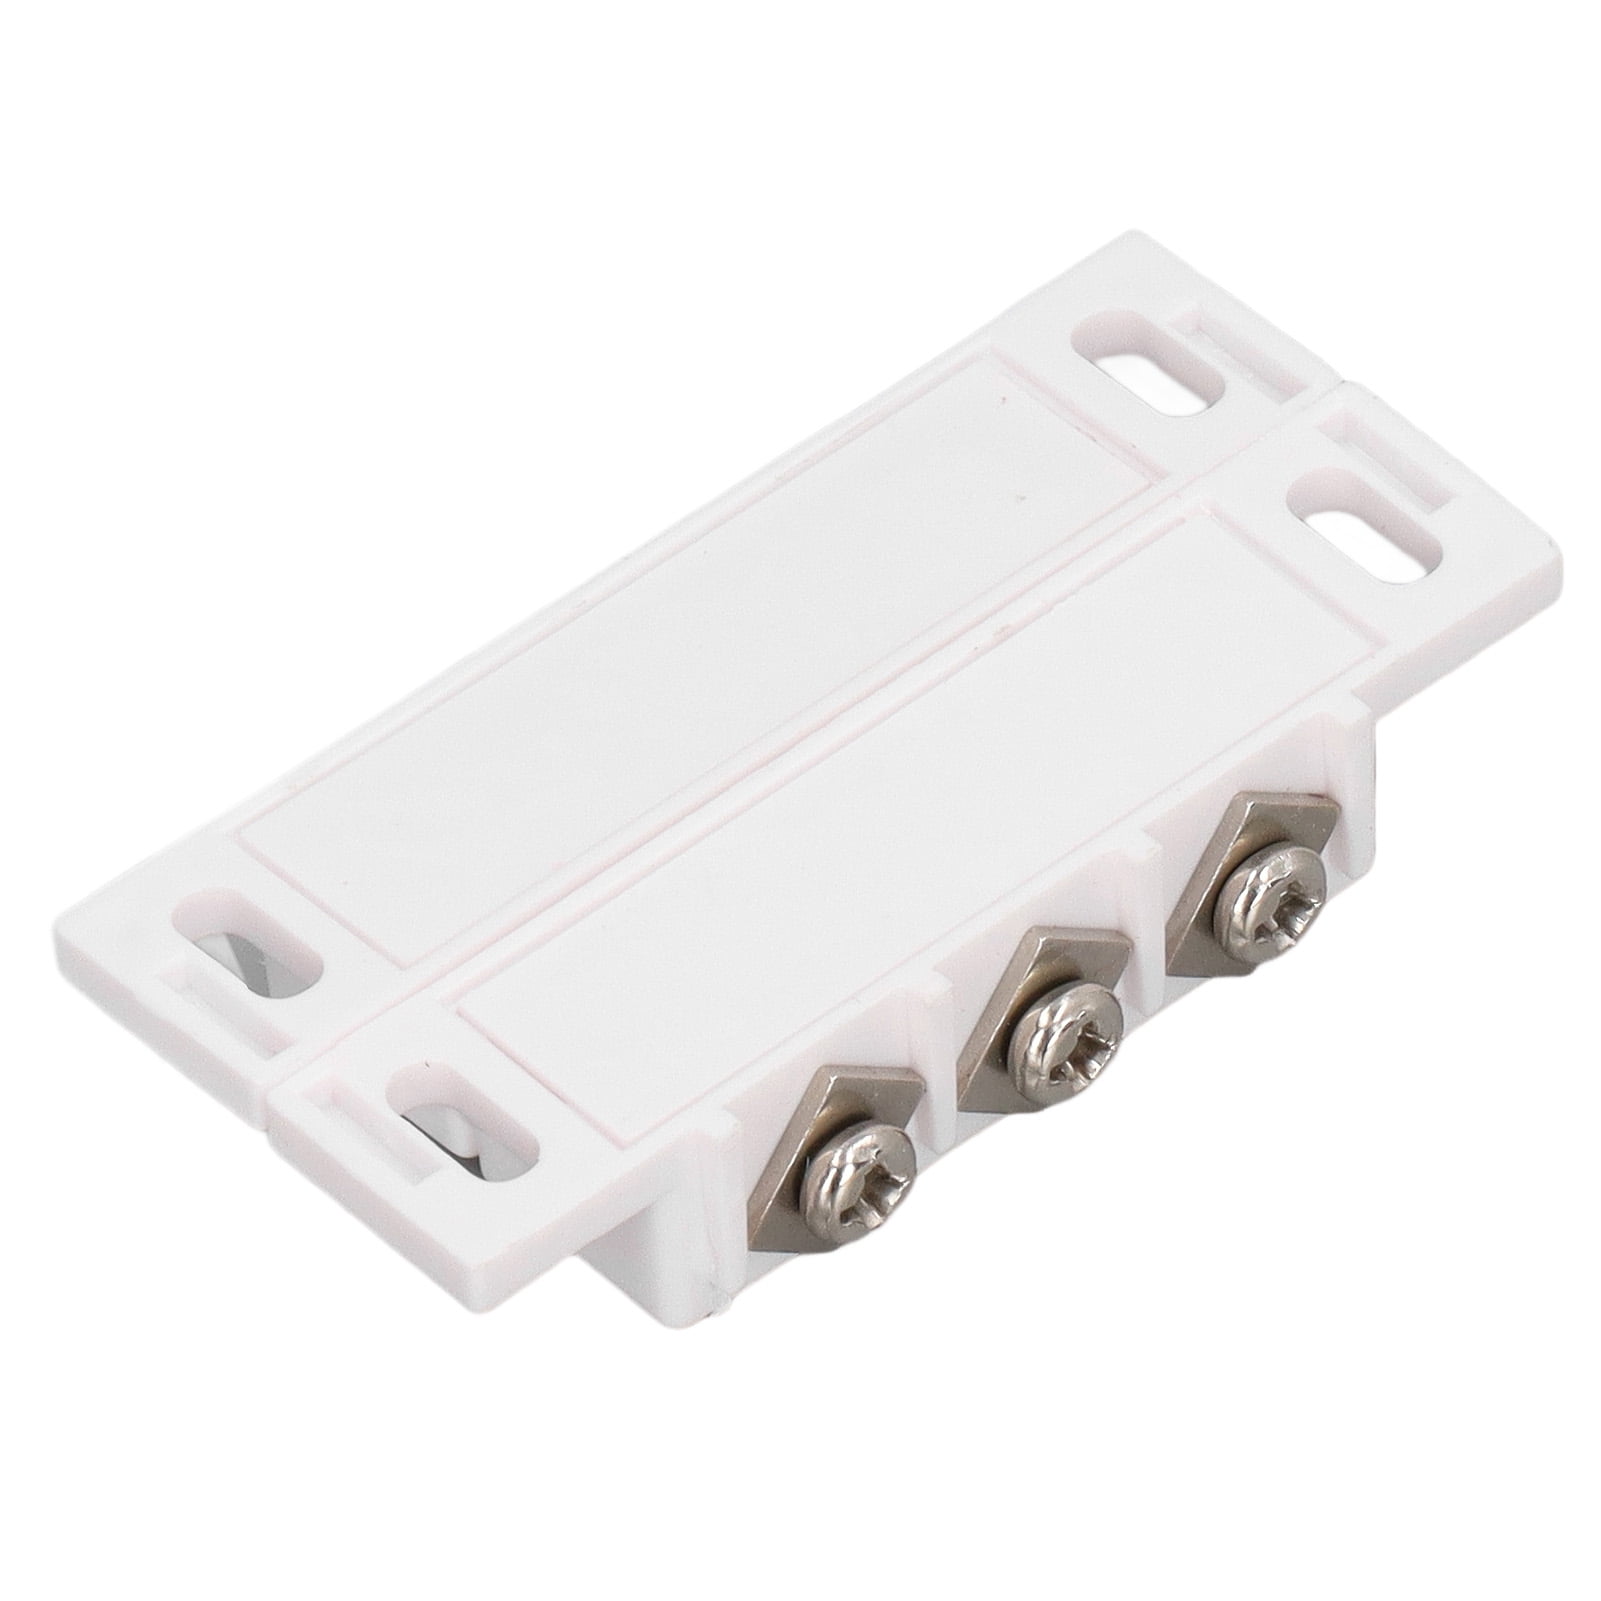 Magnetic Reed 2pcs Normally Open Closed Simple Installation Magnetic Switch Fireproof For Door For Wall - Walmart.com